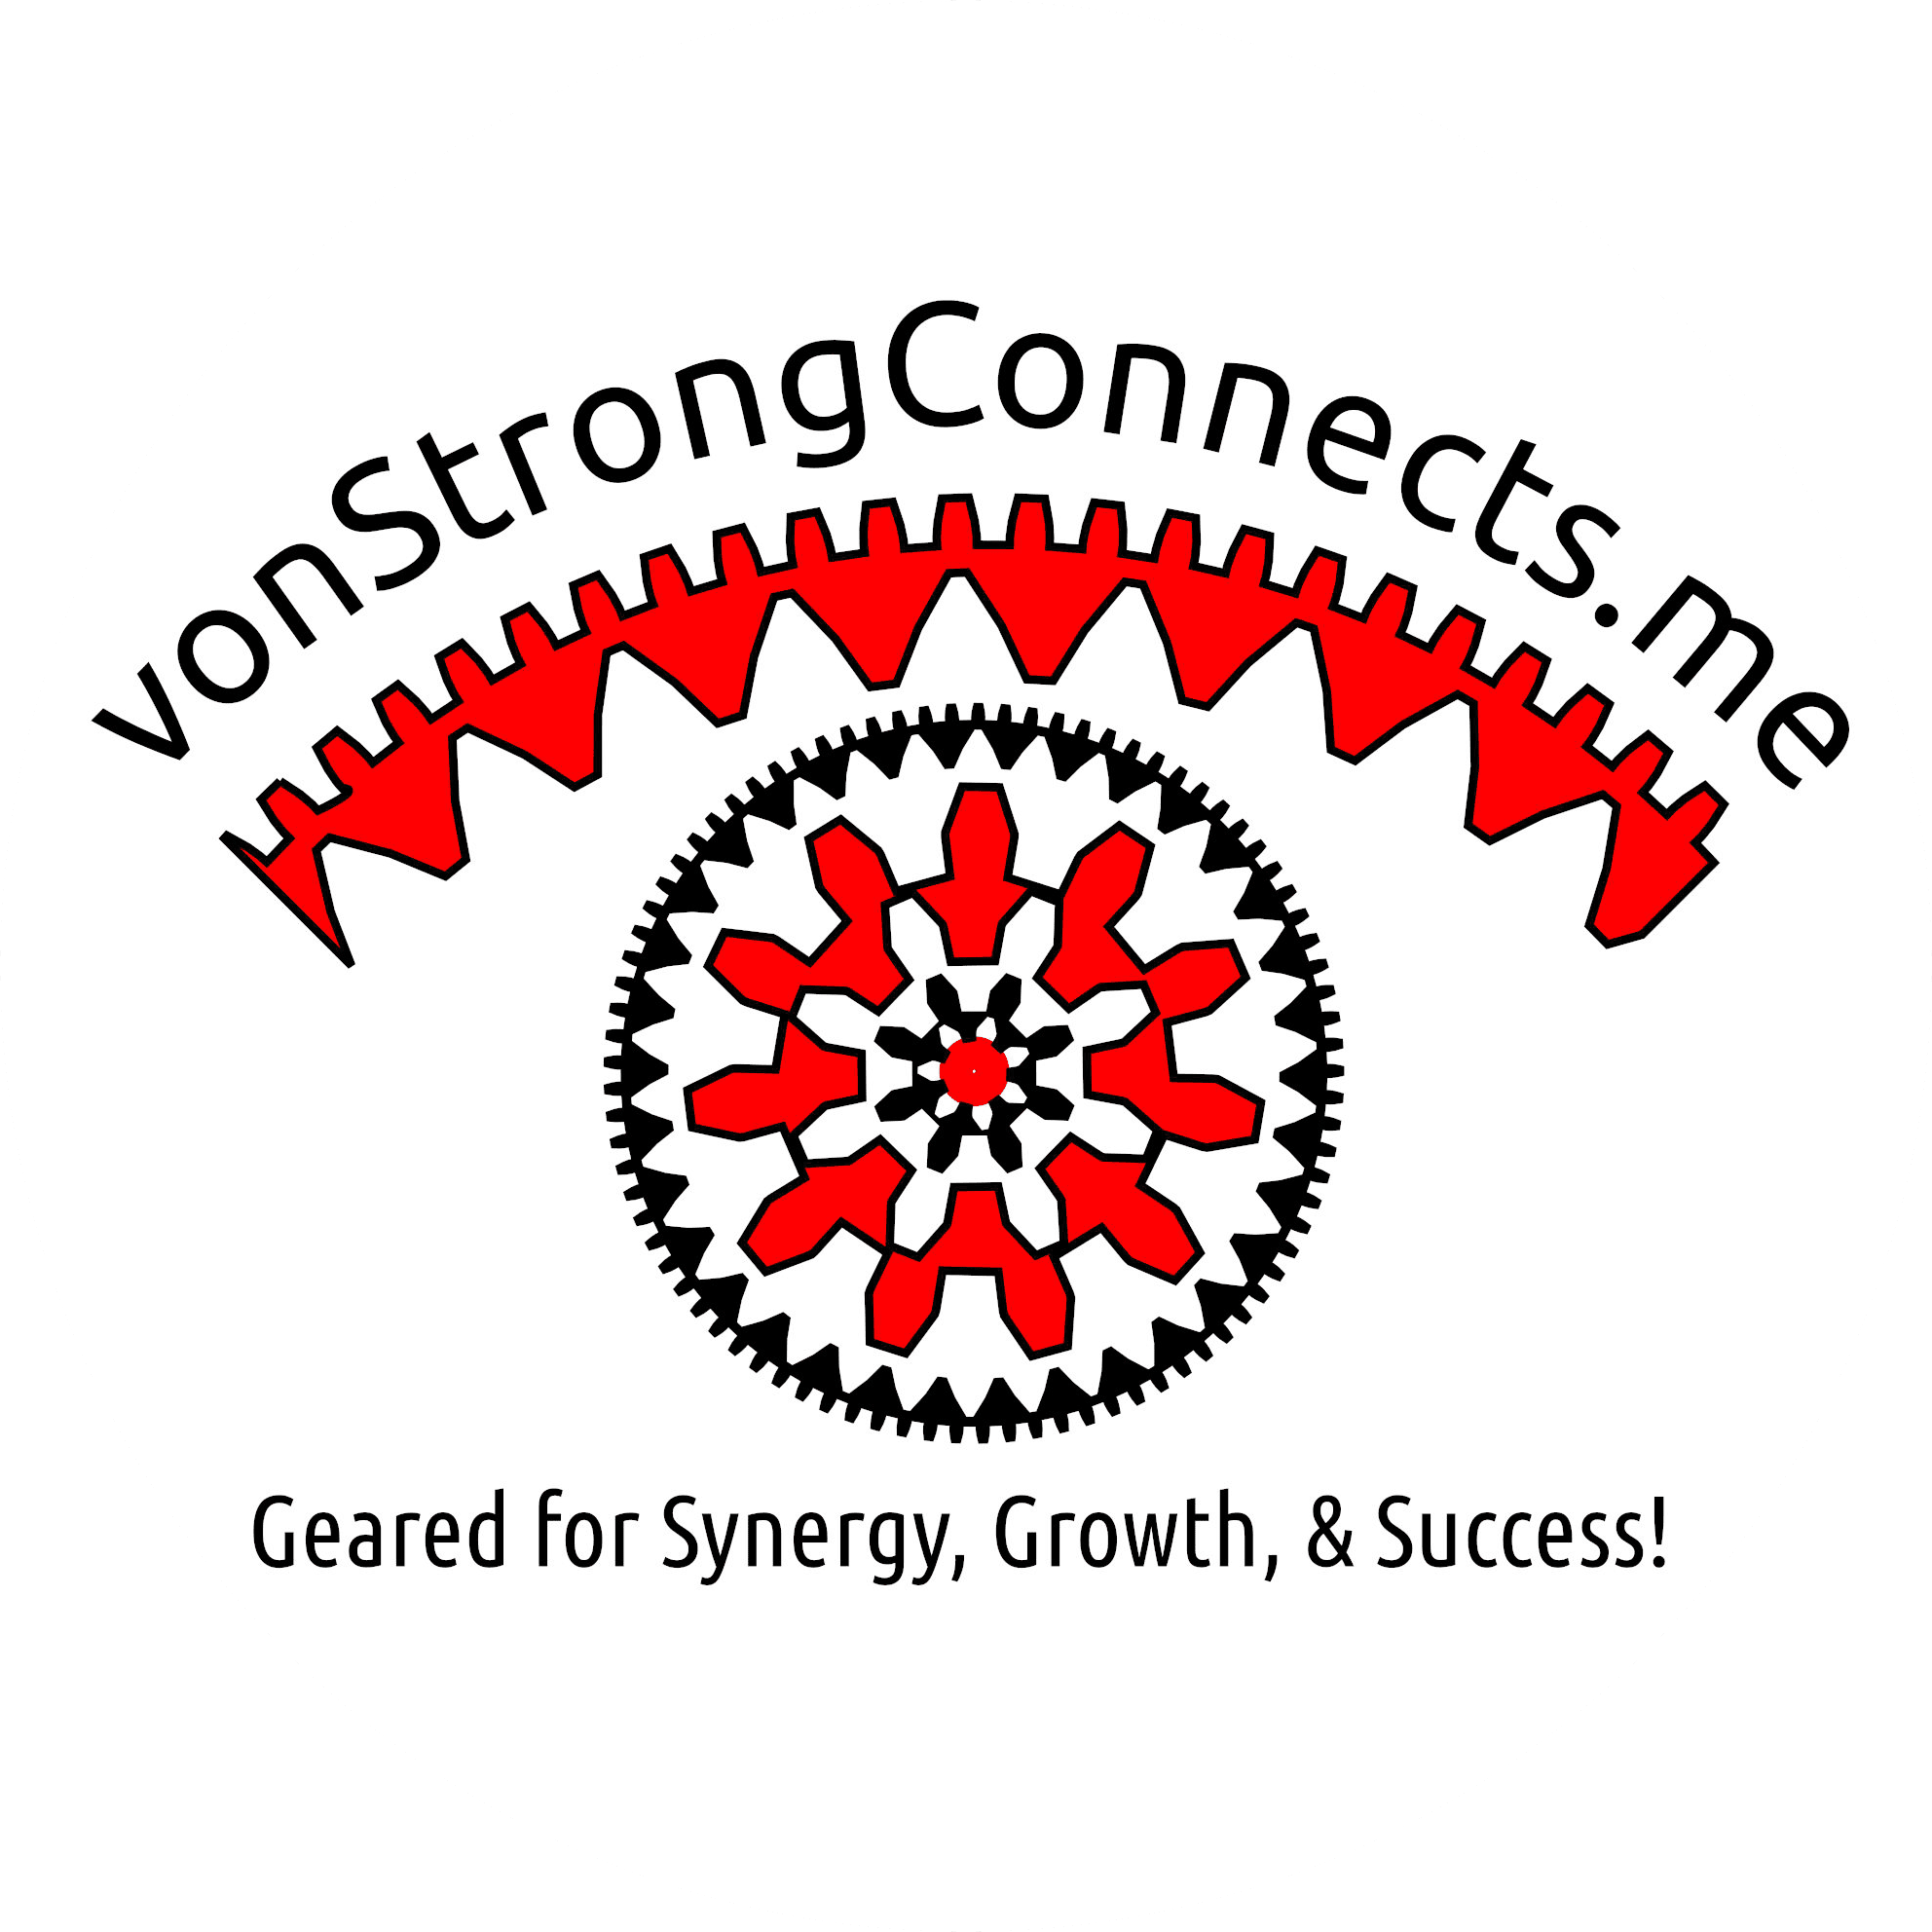 von Strong Connects